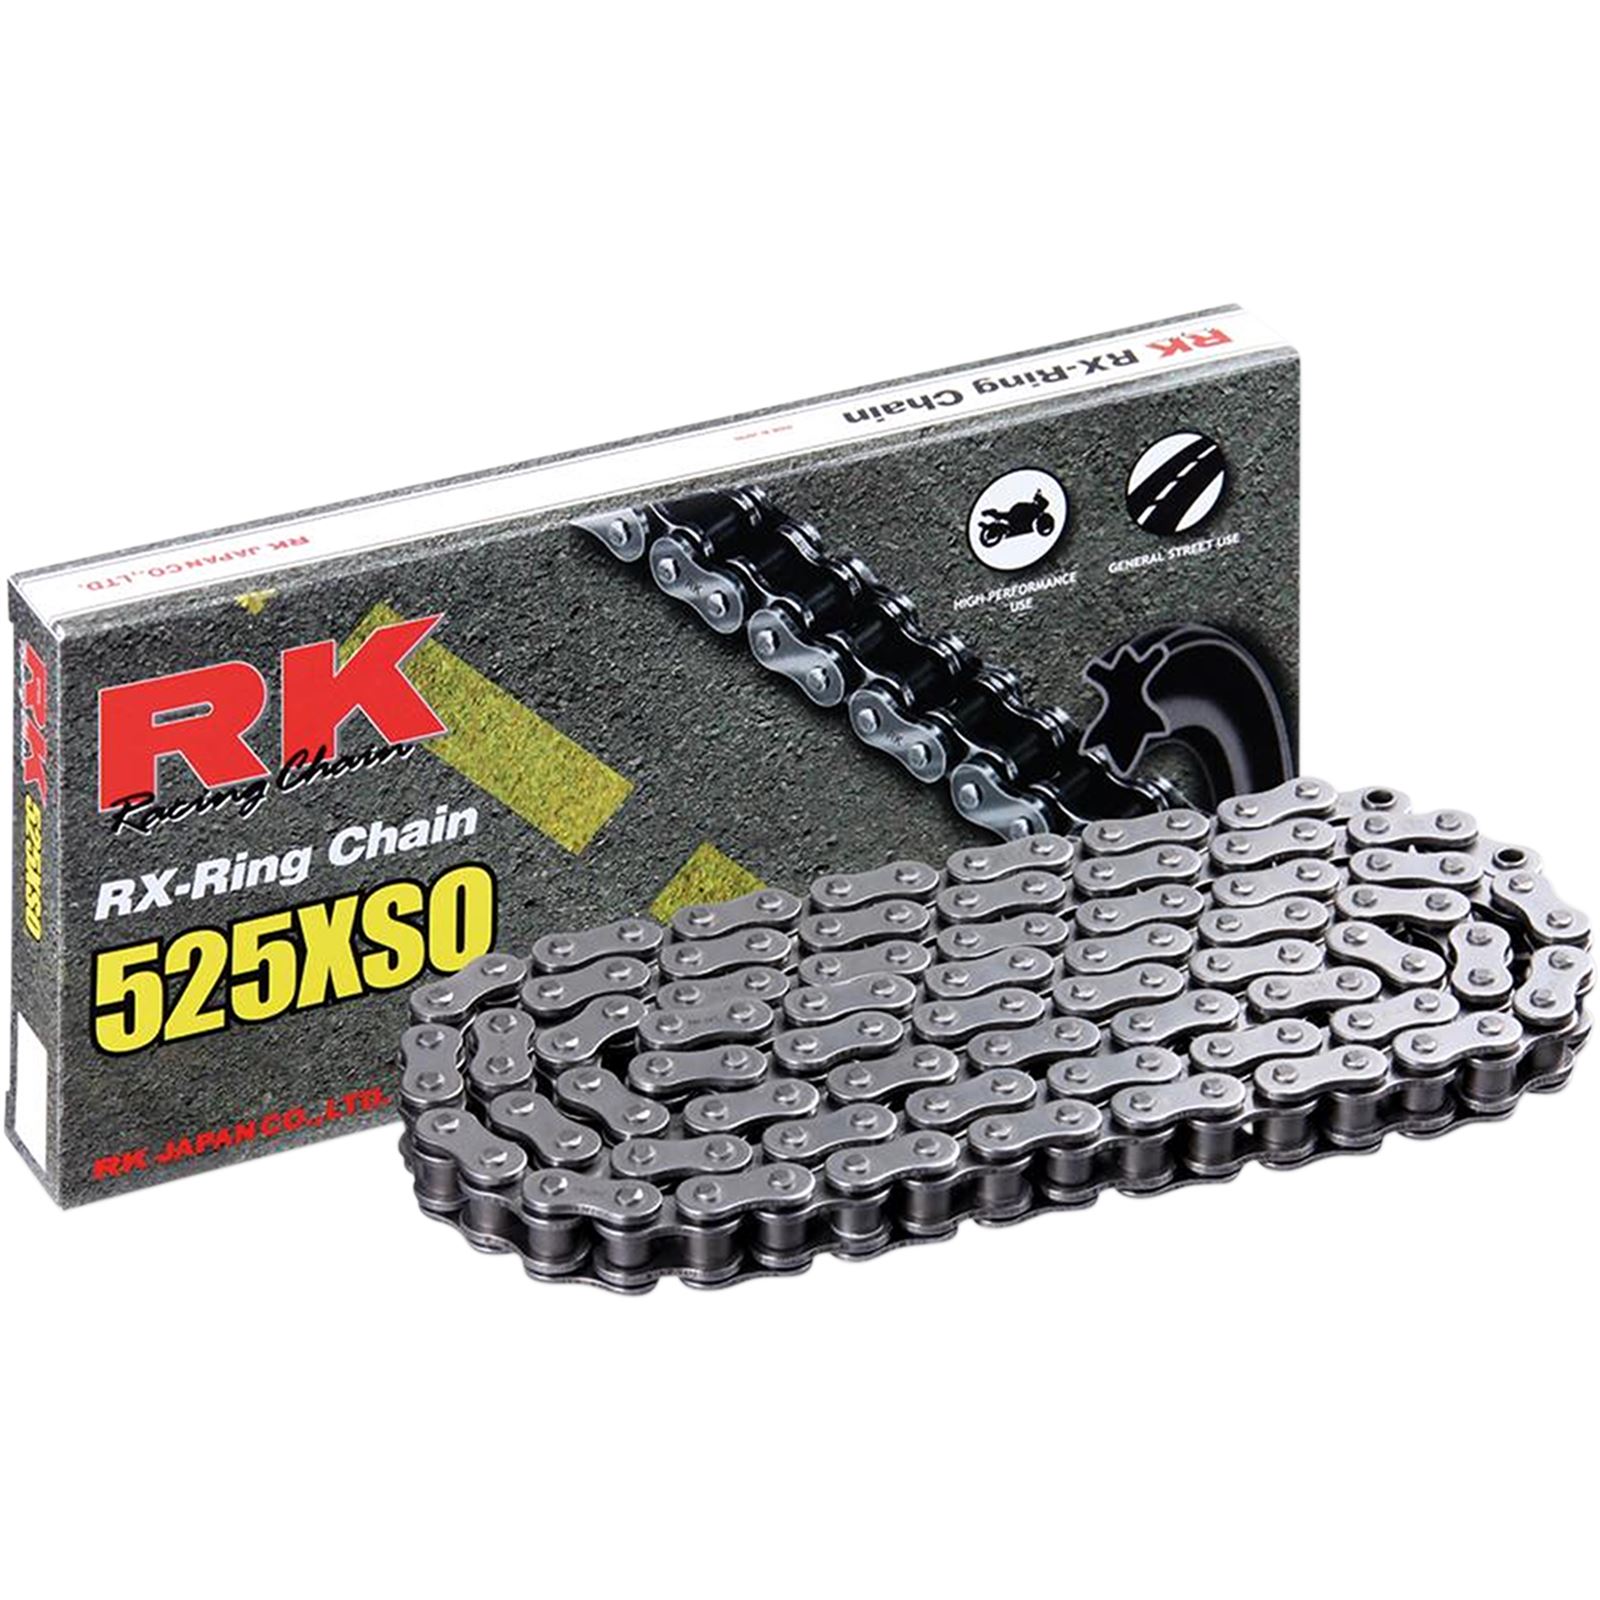 RK Excel 525 XSO - Chain - 122 Links